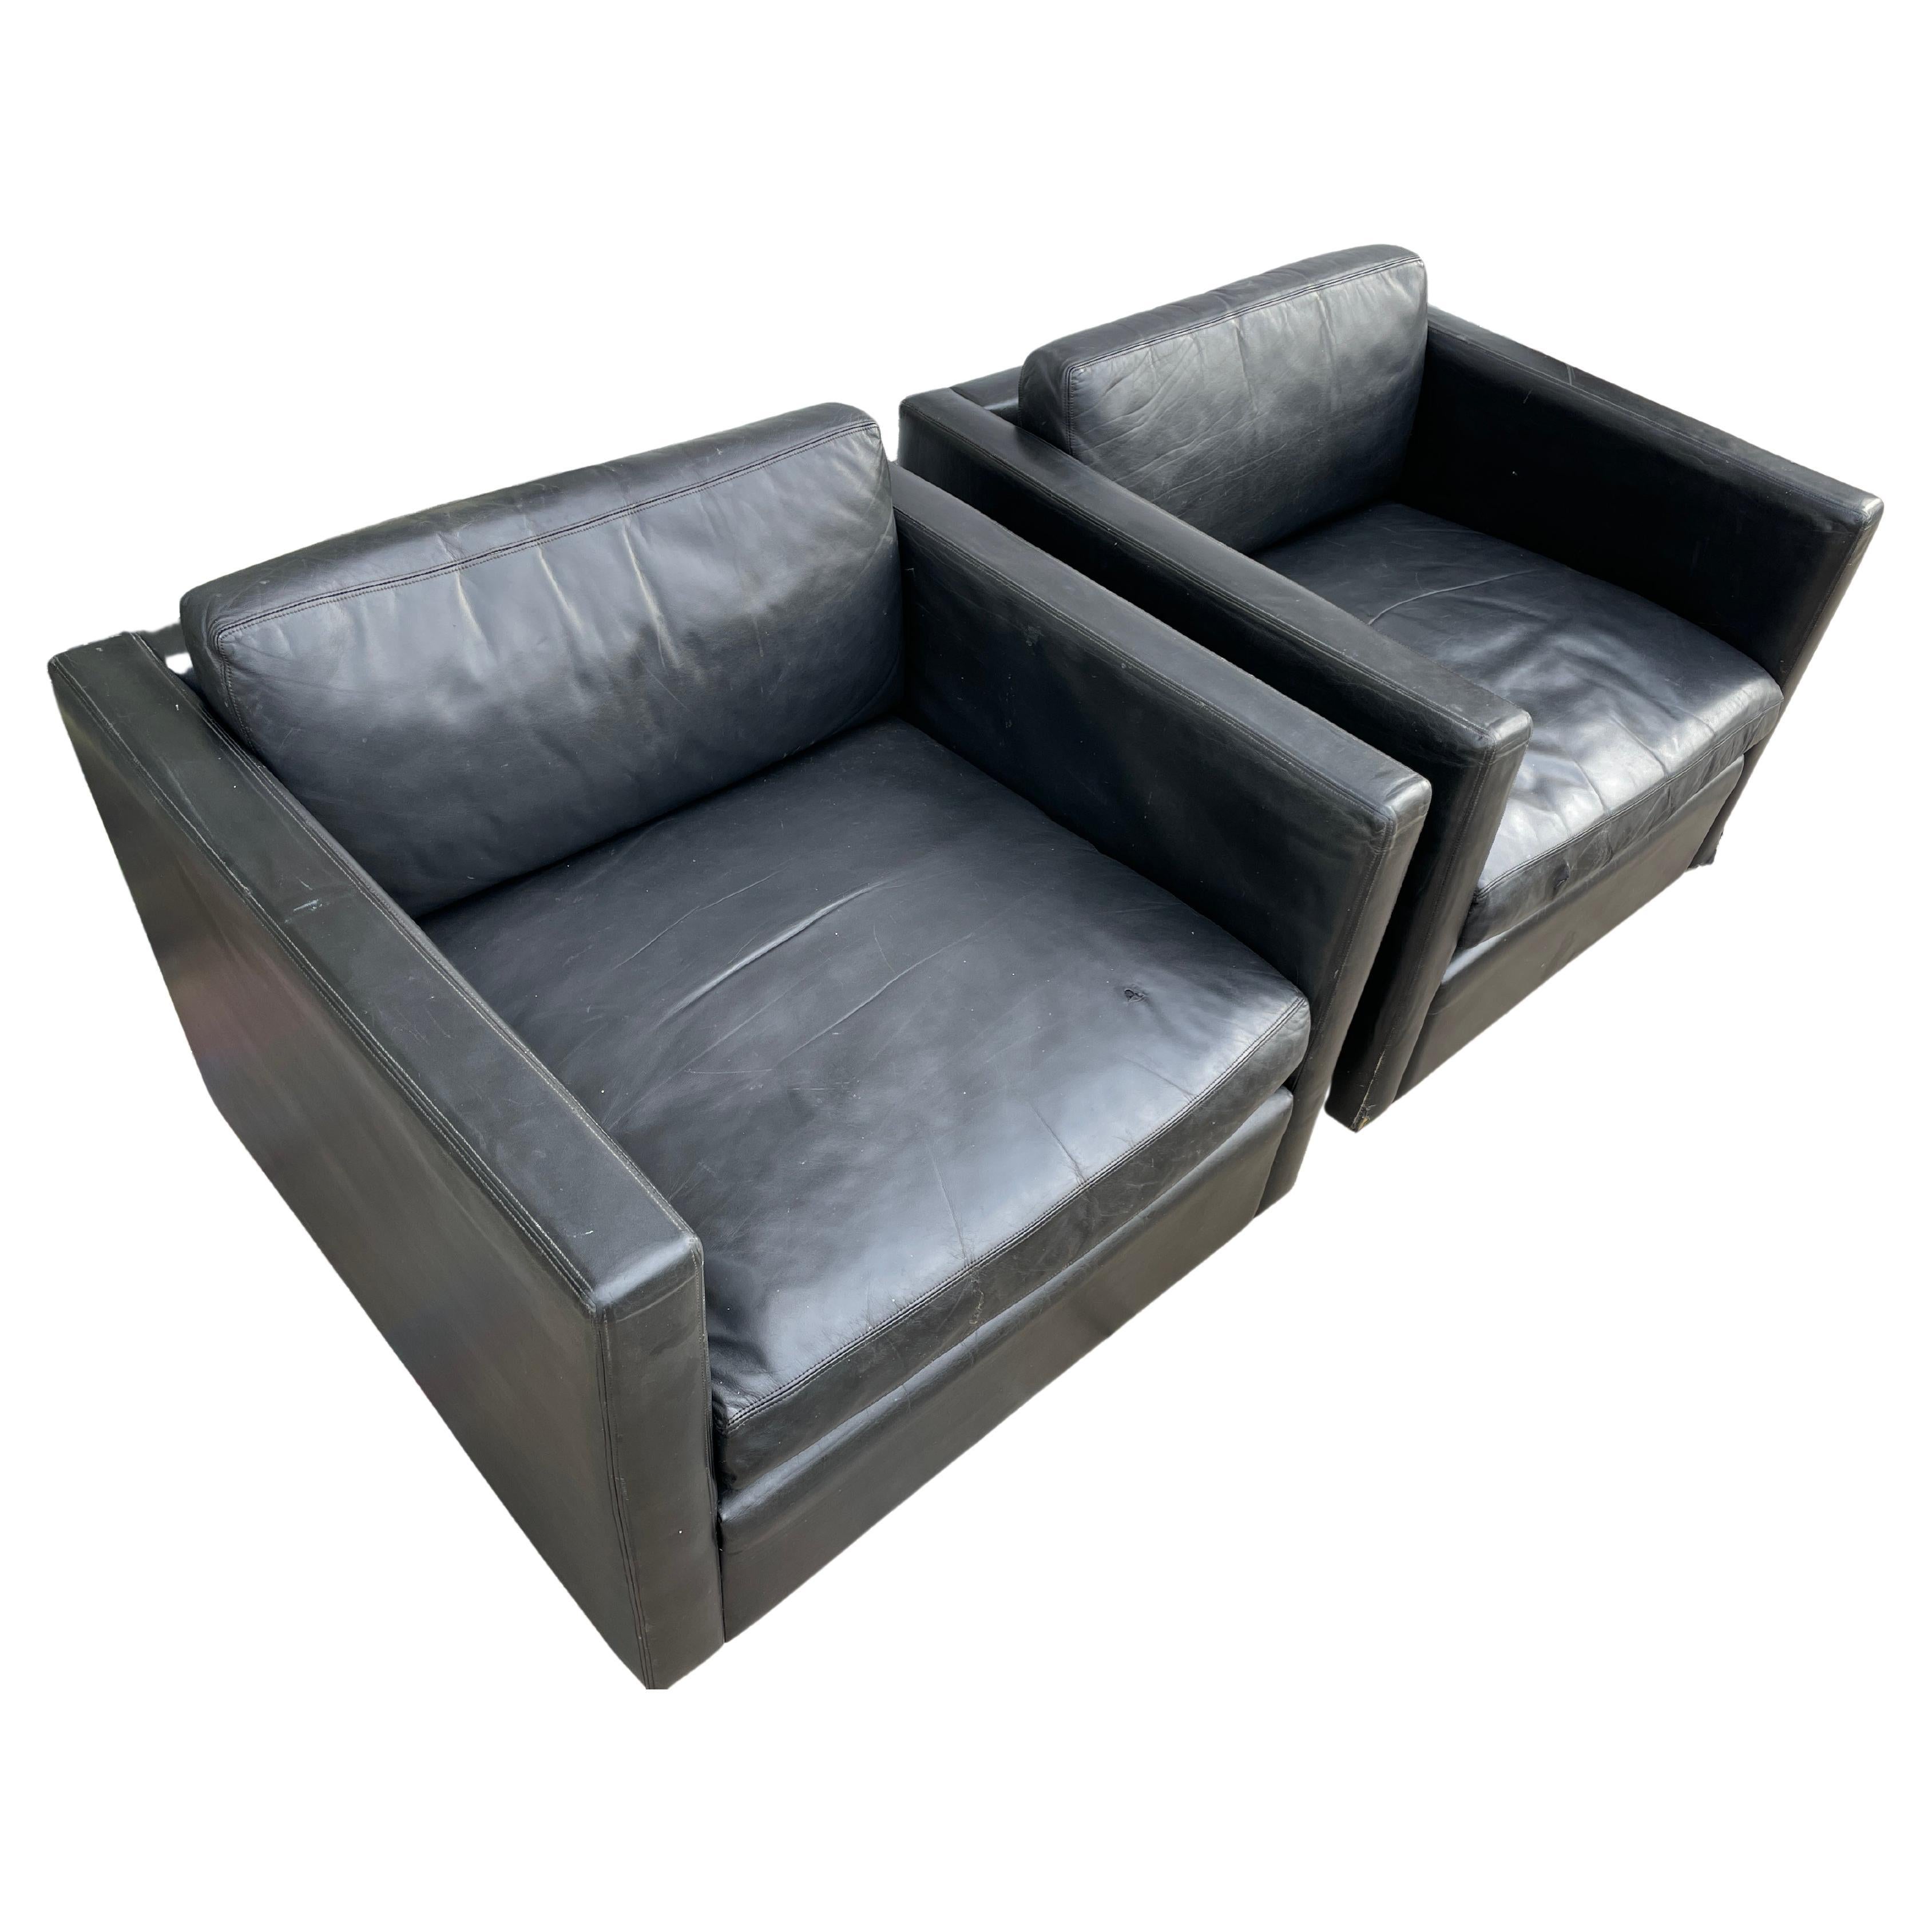 Mid-Century Modern Pfister Cube Lounge Chairs for Knoll in Black Leather For Sale 4